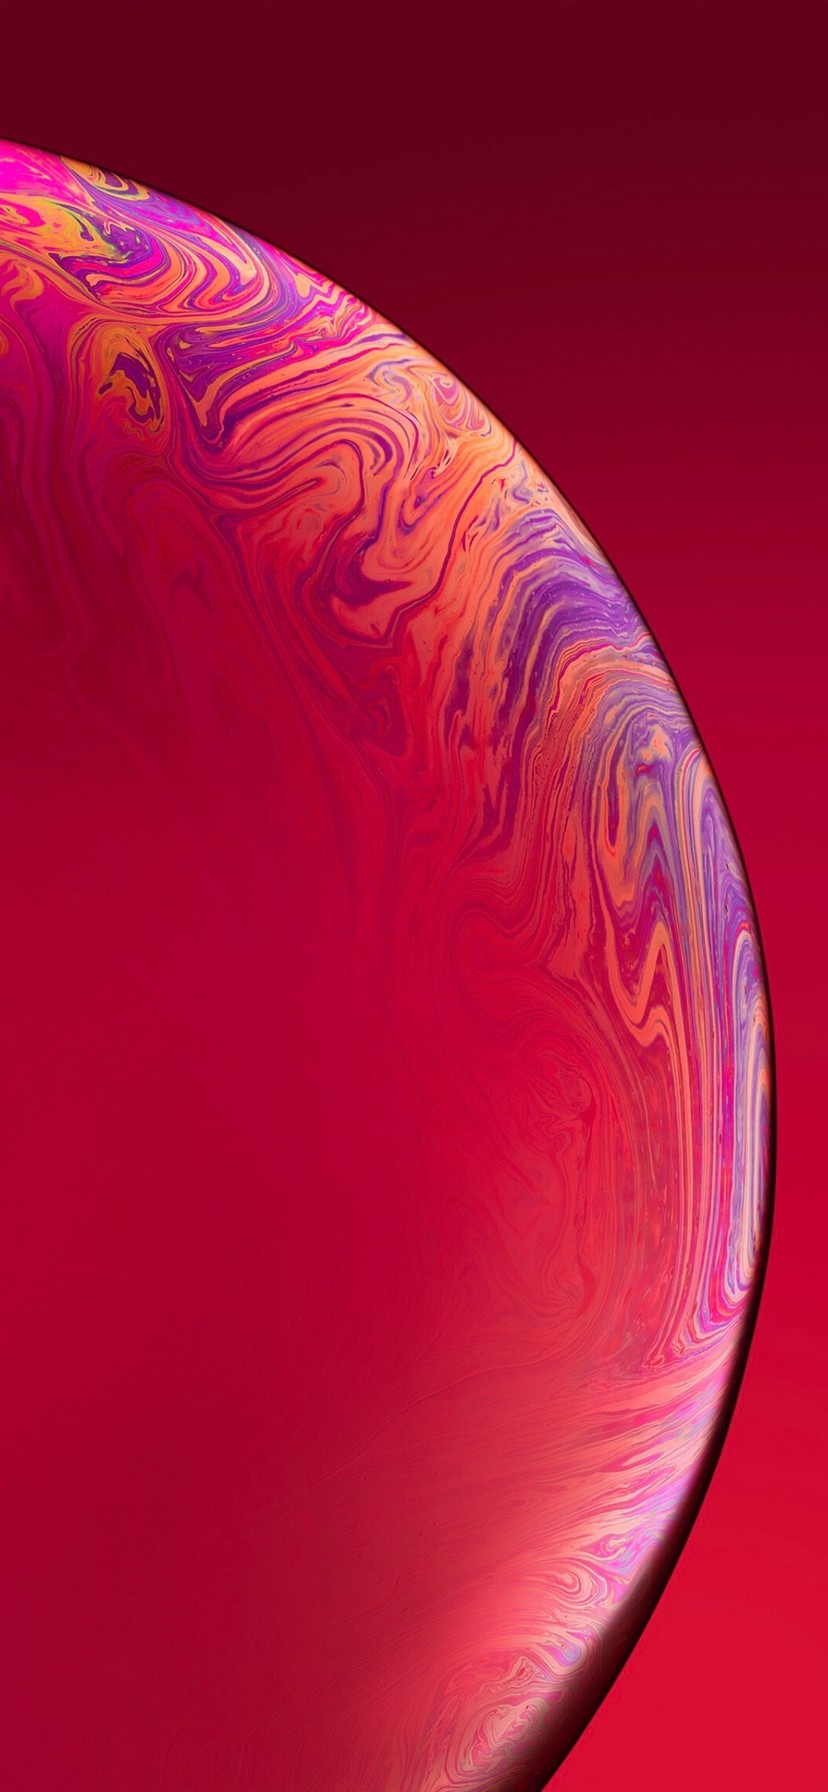 Iphone Xr Home Screen Wallpaper With High-resolution - Iphone 8 Plus Wallpaper Red - HD Wallpaper 